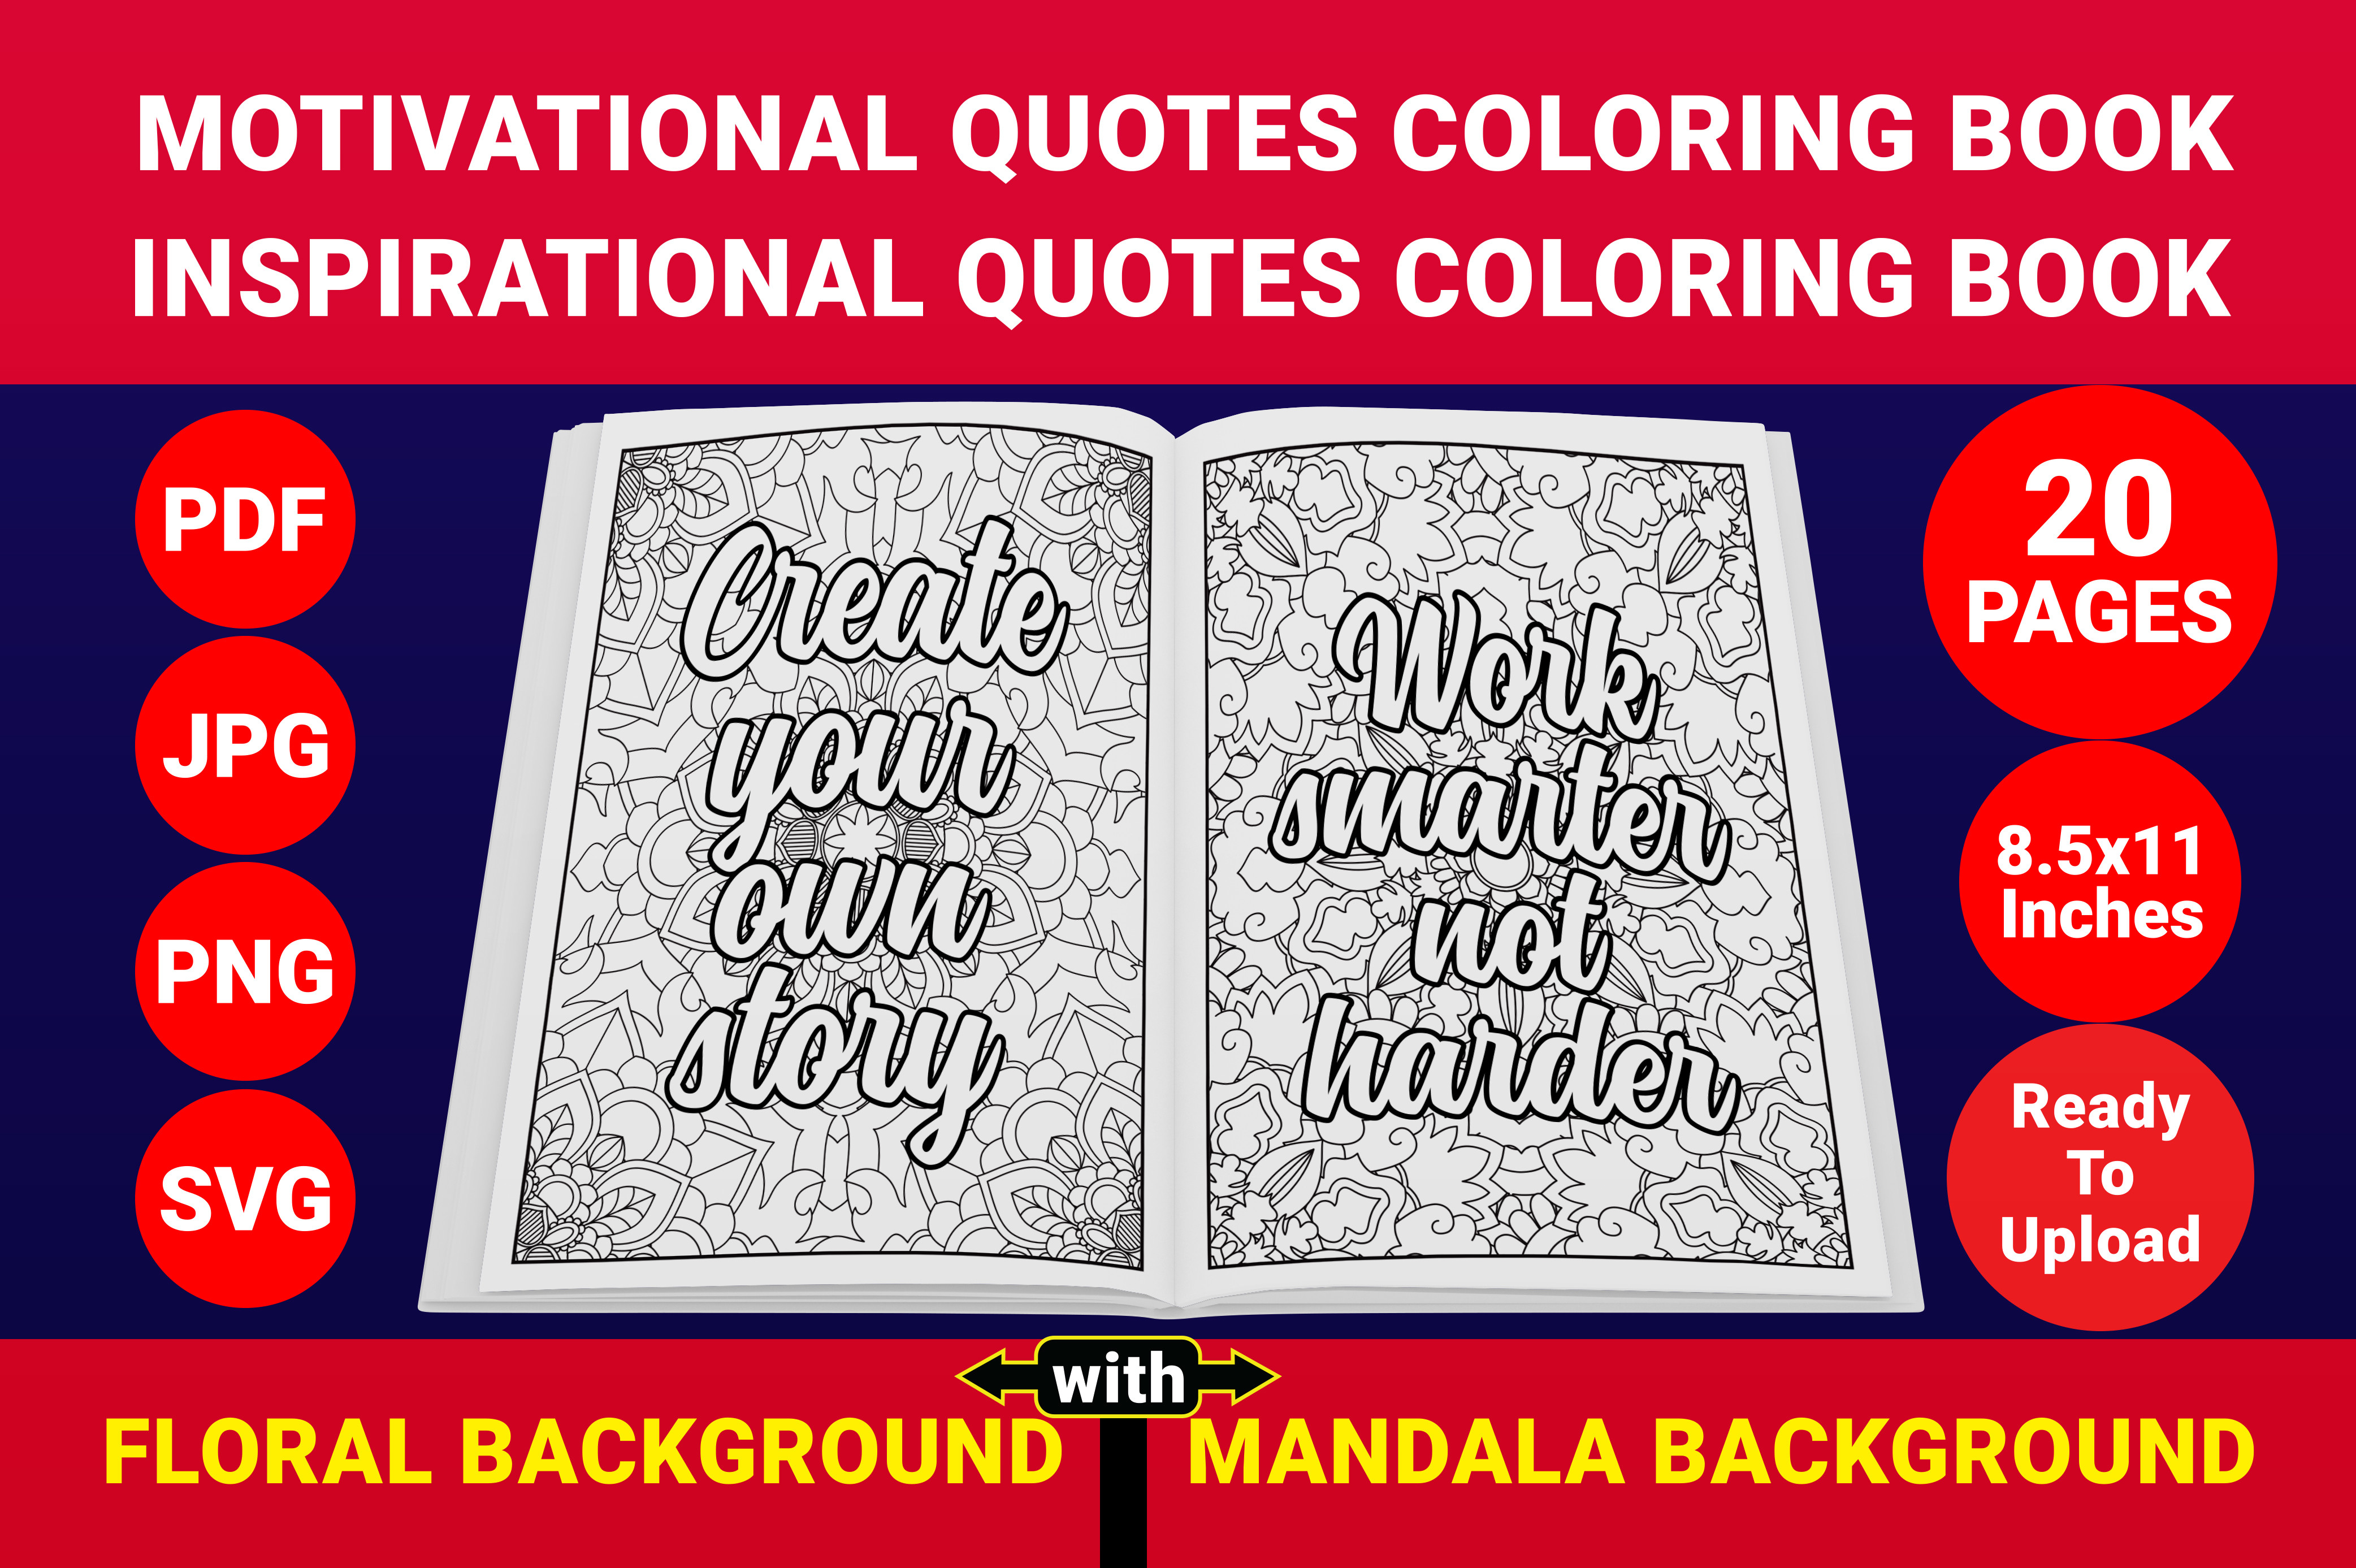 Inspirational Quotes Coloring Book Graphic by Iqra Graphics Design ...